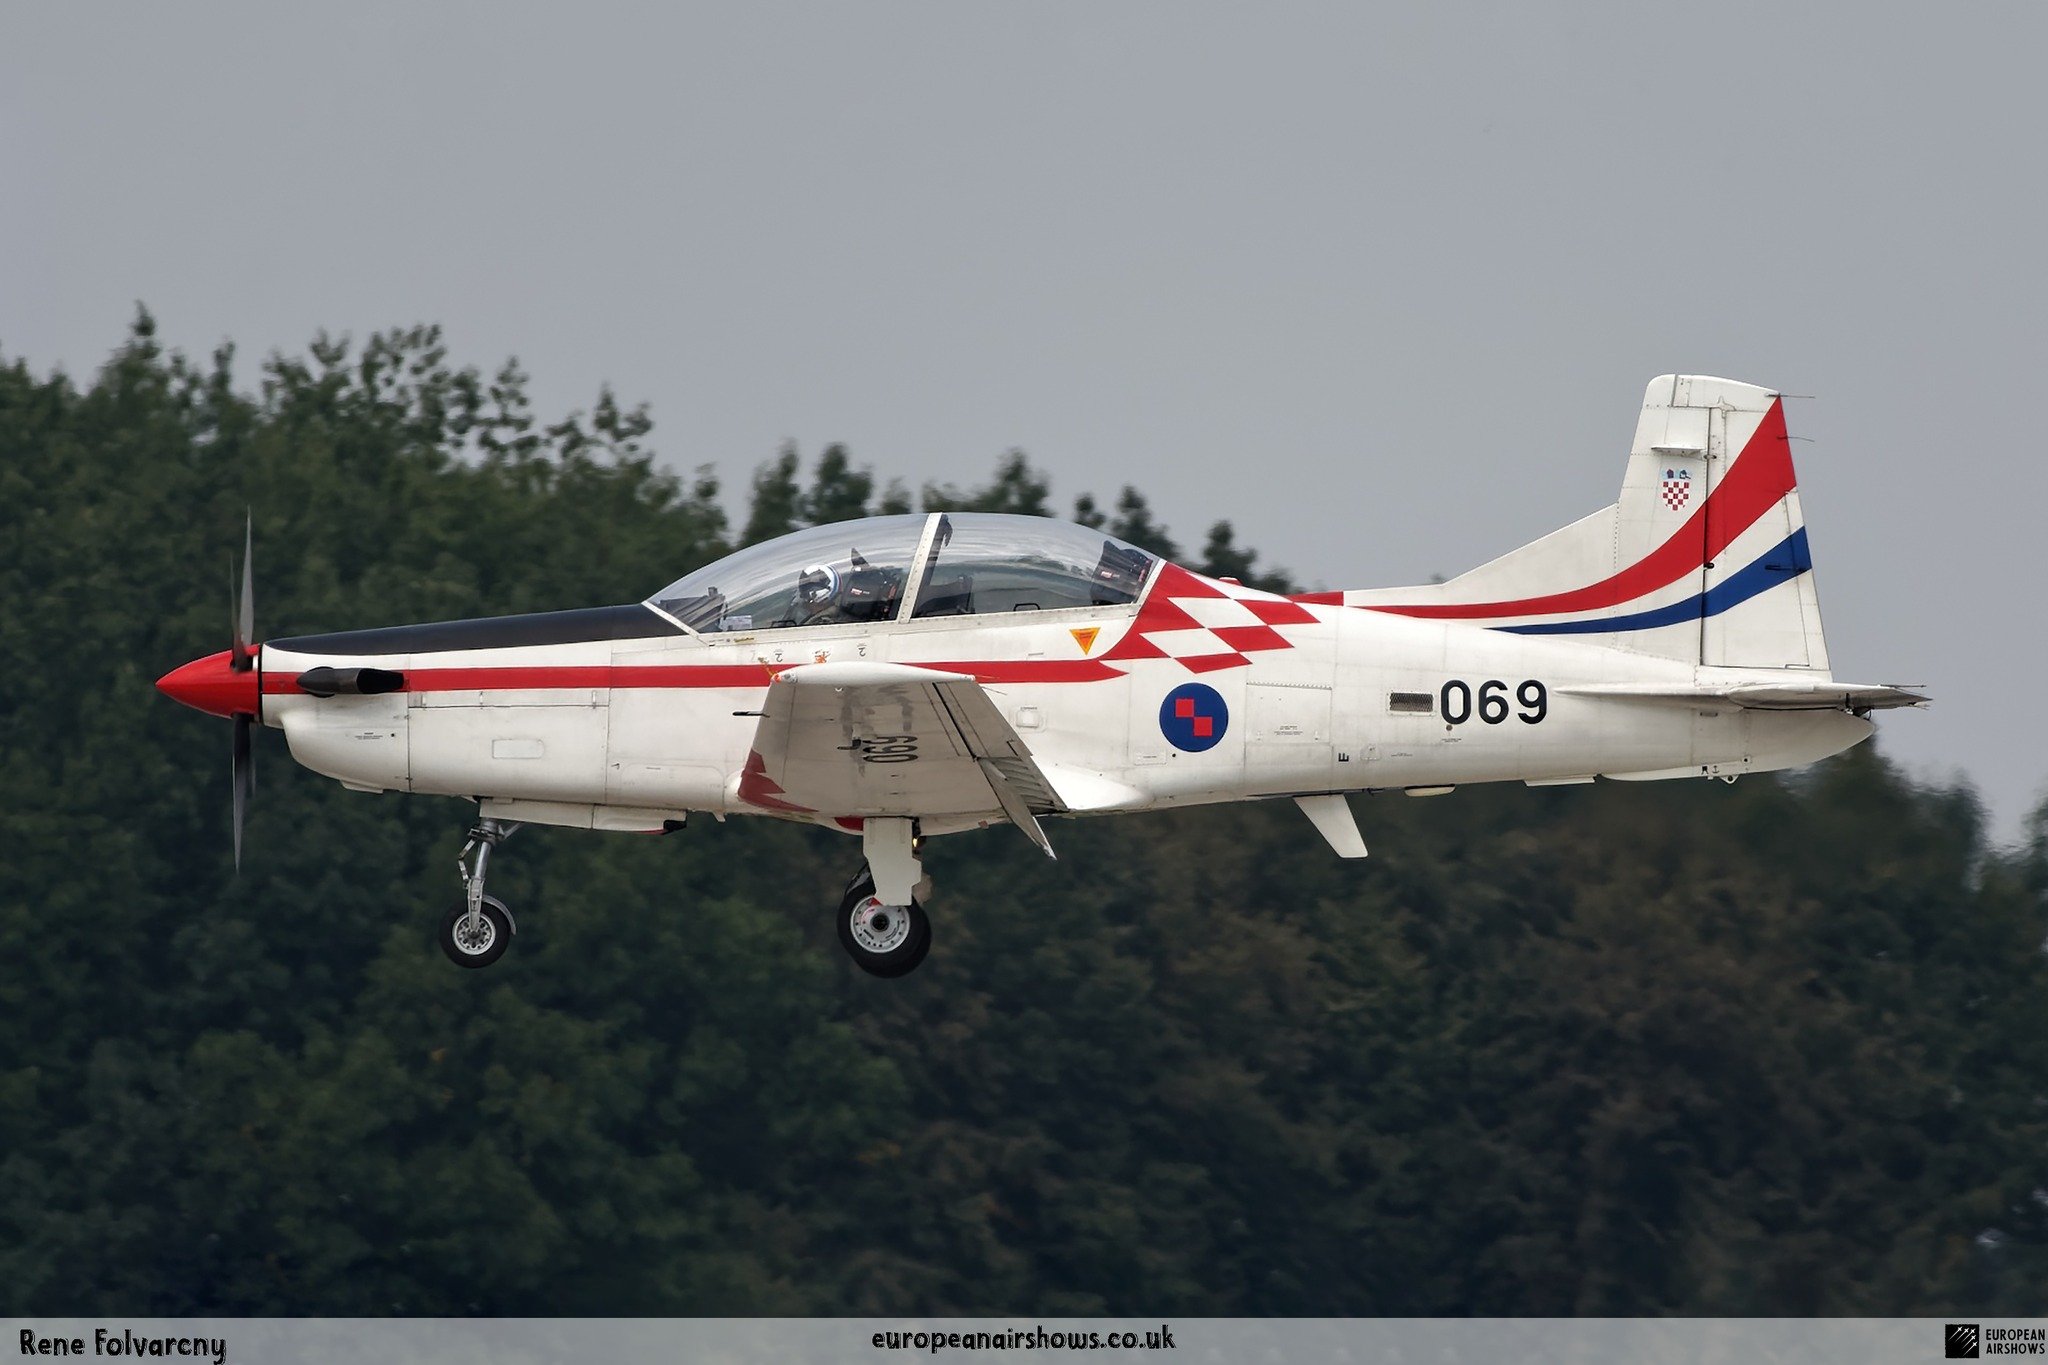 #Onthisday📅 7 May 1984, Pilatus PC-9 performed its first flight. 

Developed as a more powerful version of the popular Pilatus PC-7 trainer, the Pilatus PC-9 first flew in 1984. The PC-9 built on the PC-7 design by fitting a more powerful engine, st